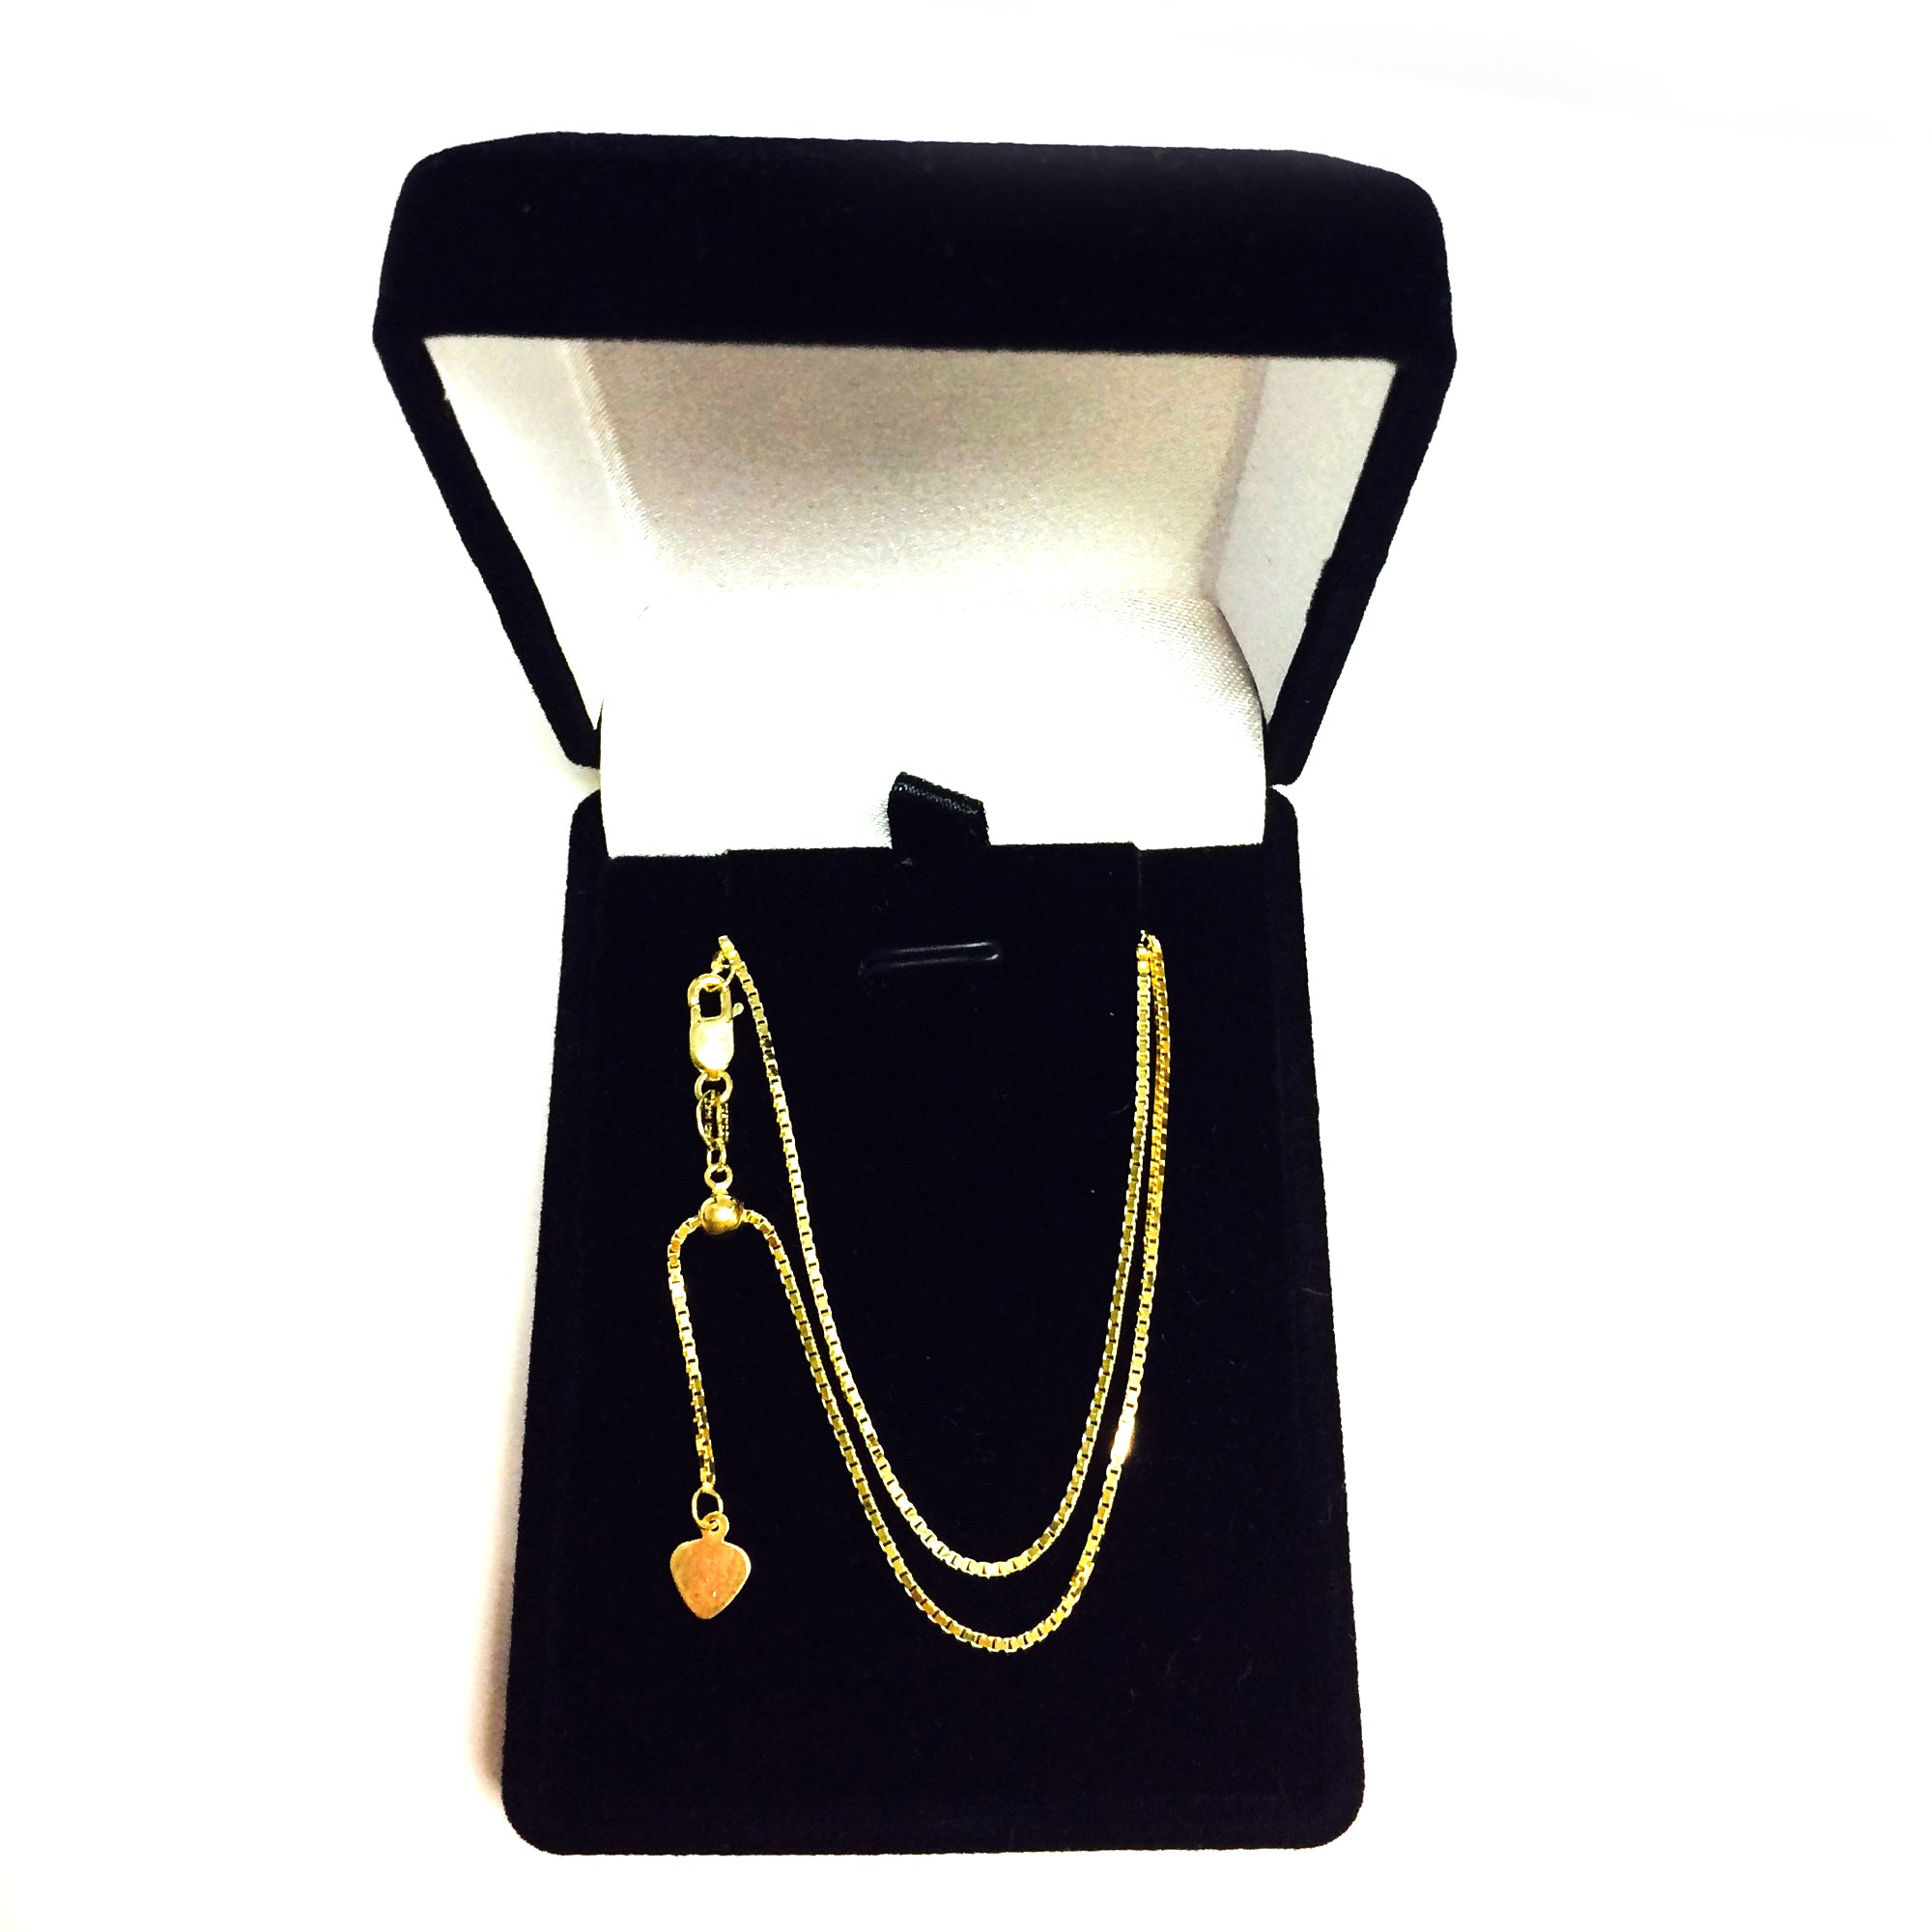 14k Yellow Gold Adjustable Box Chain Necklace, 1.15mm, 22" fine designer jewelry for men and women